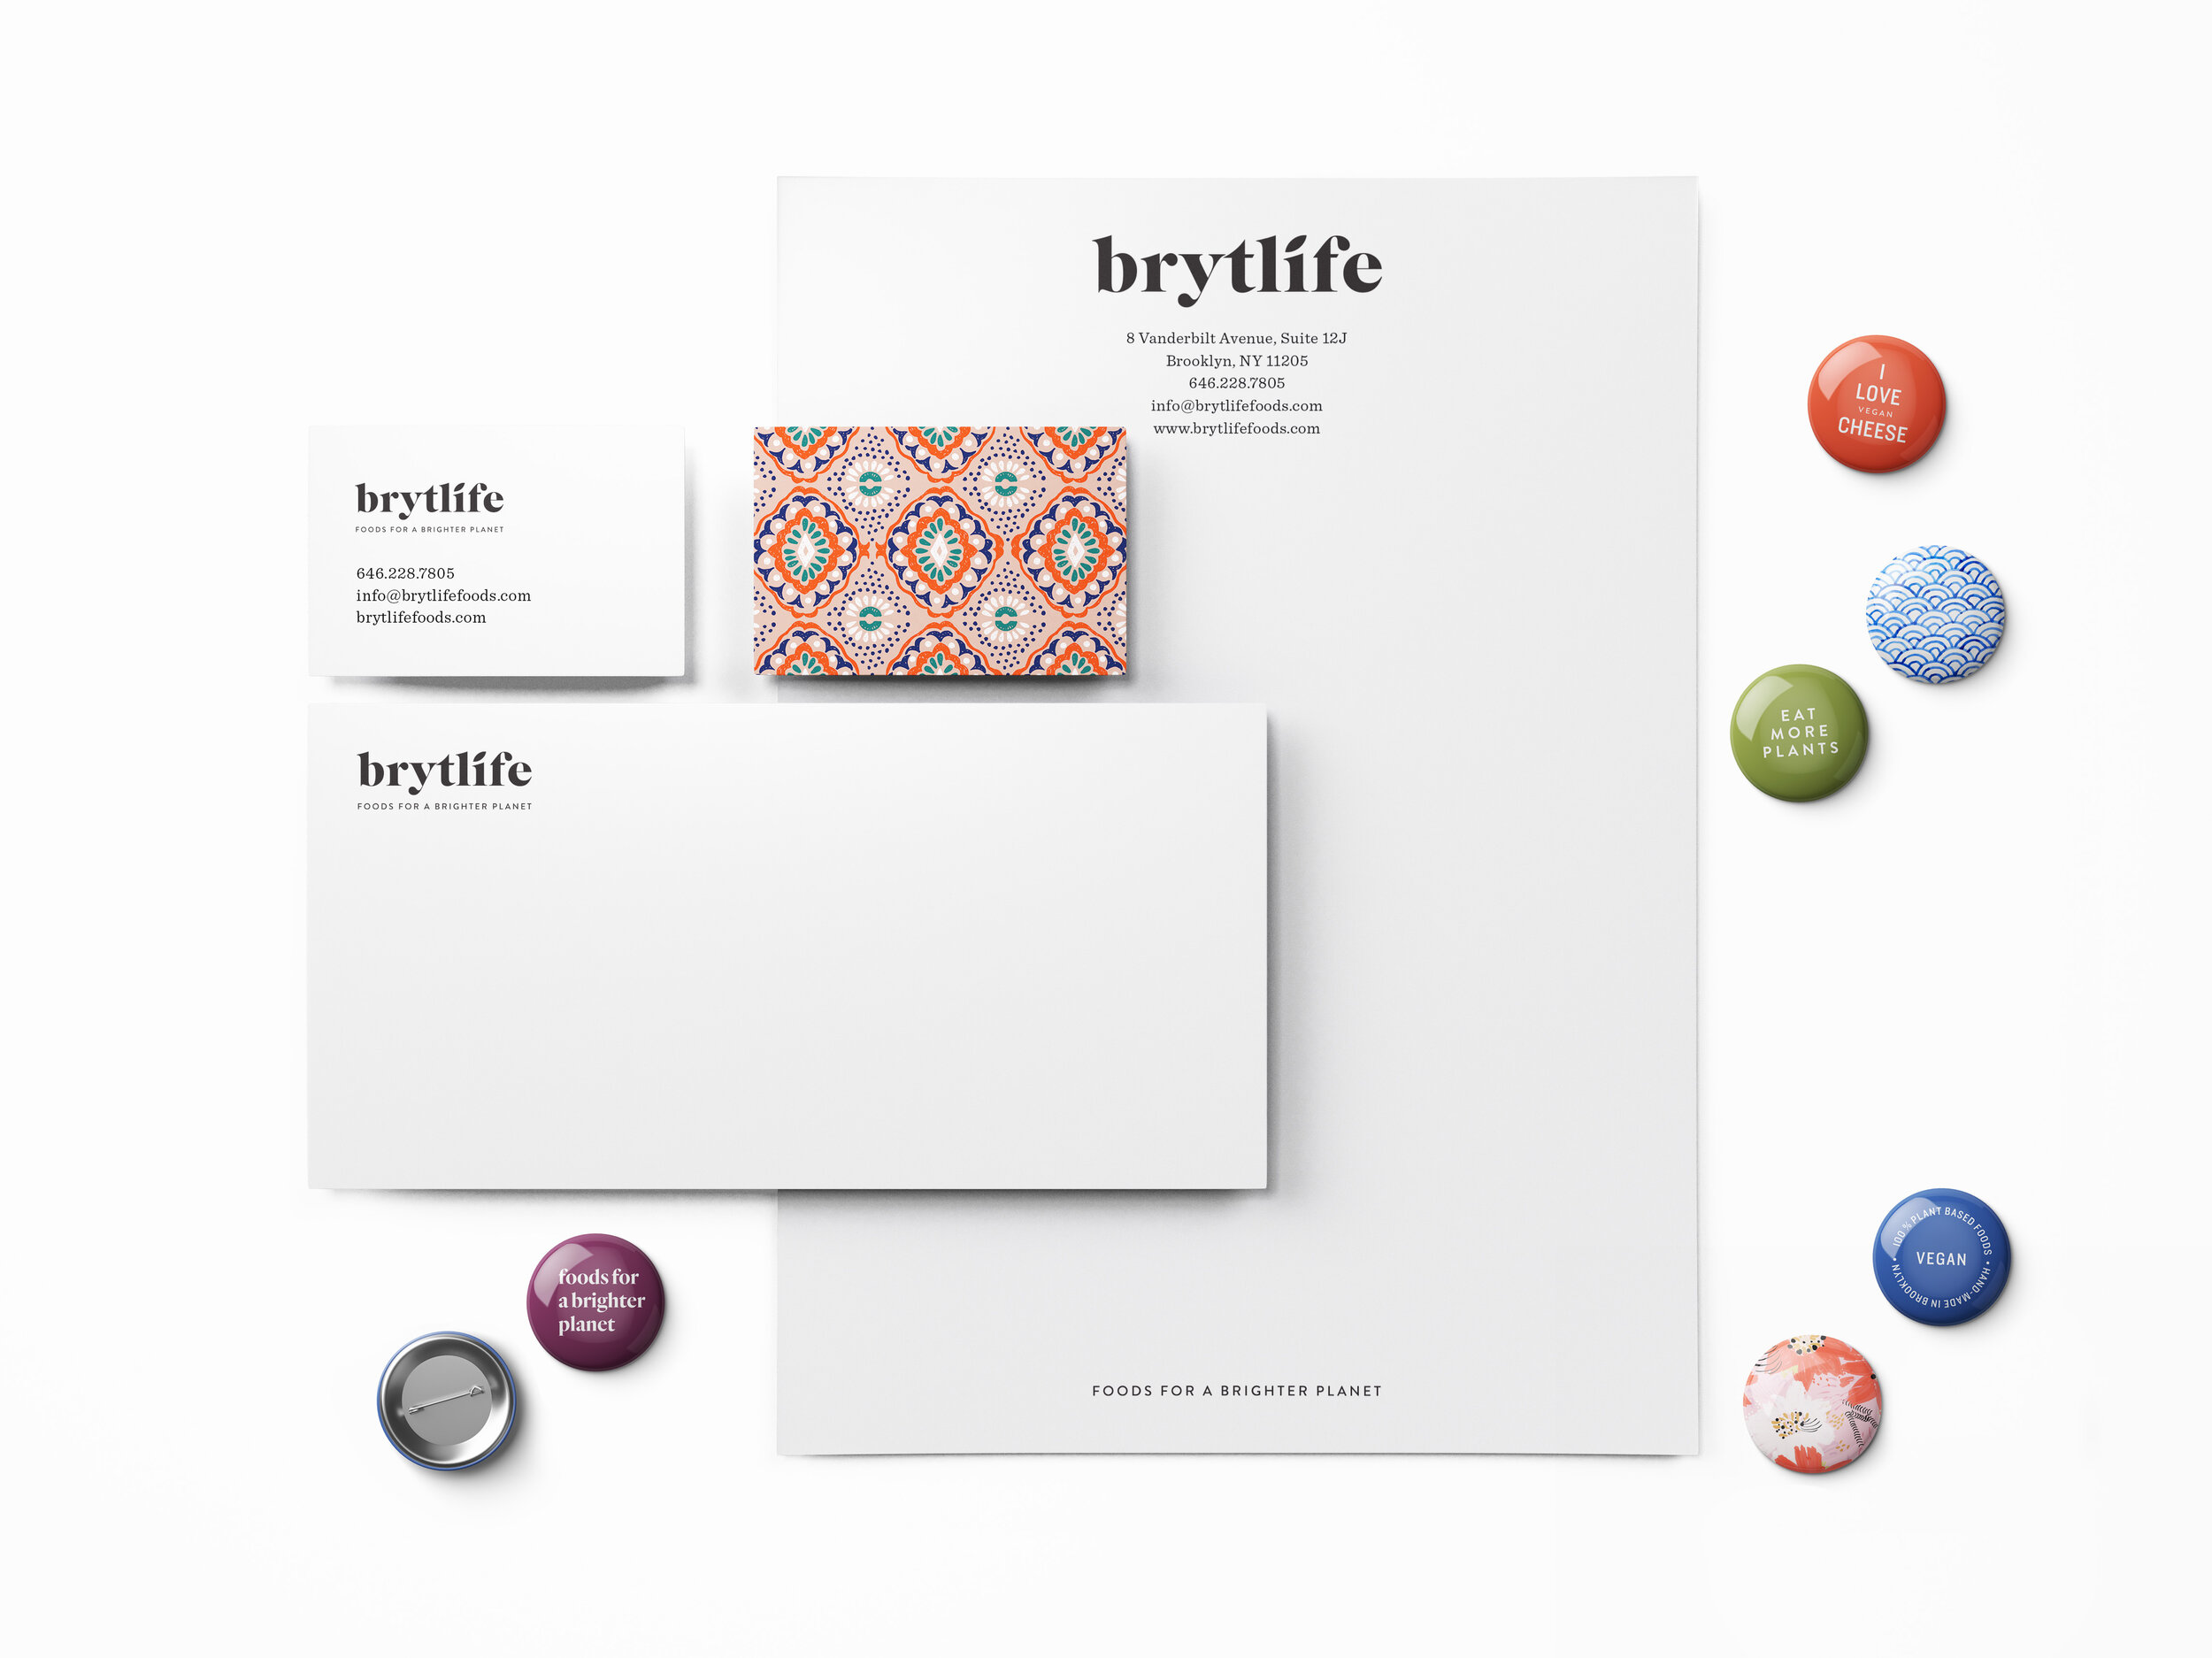 Brytlife Vegan Foods Stationery Design by The Artful Union